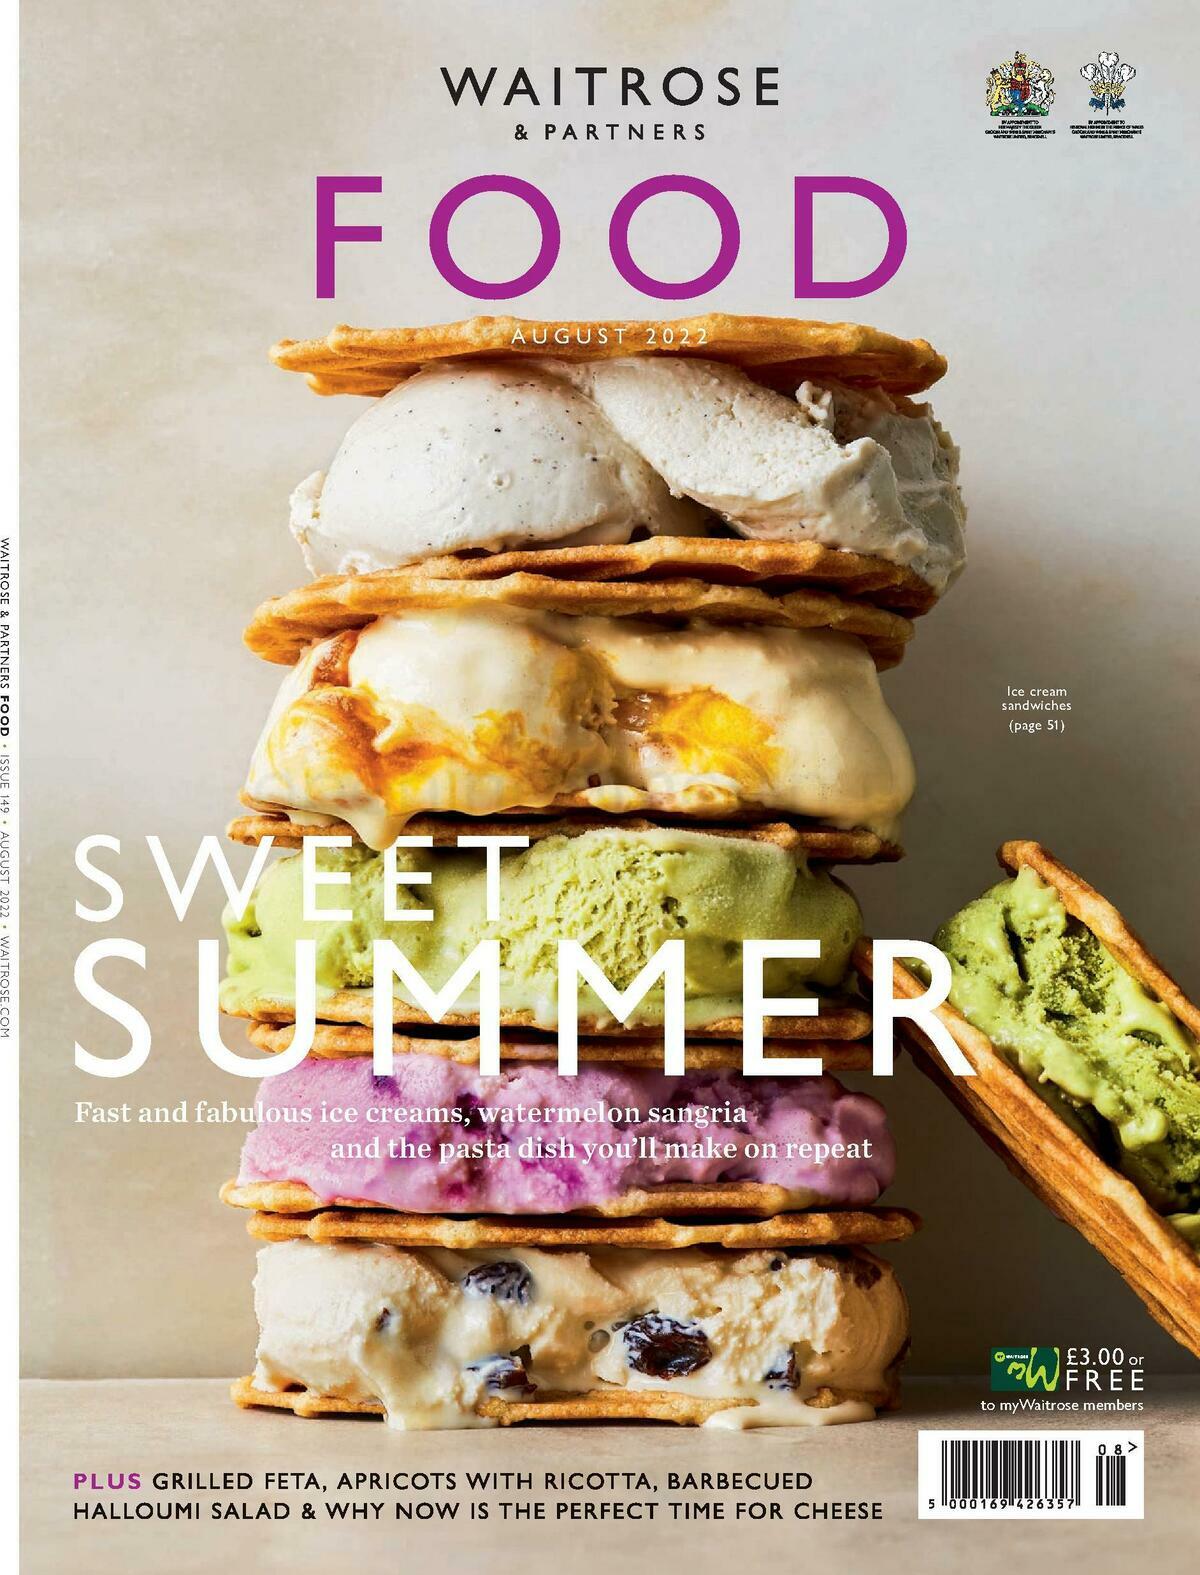 Waitrose Food Magazine August Offers from 1 August